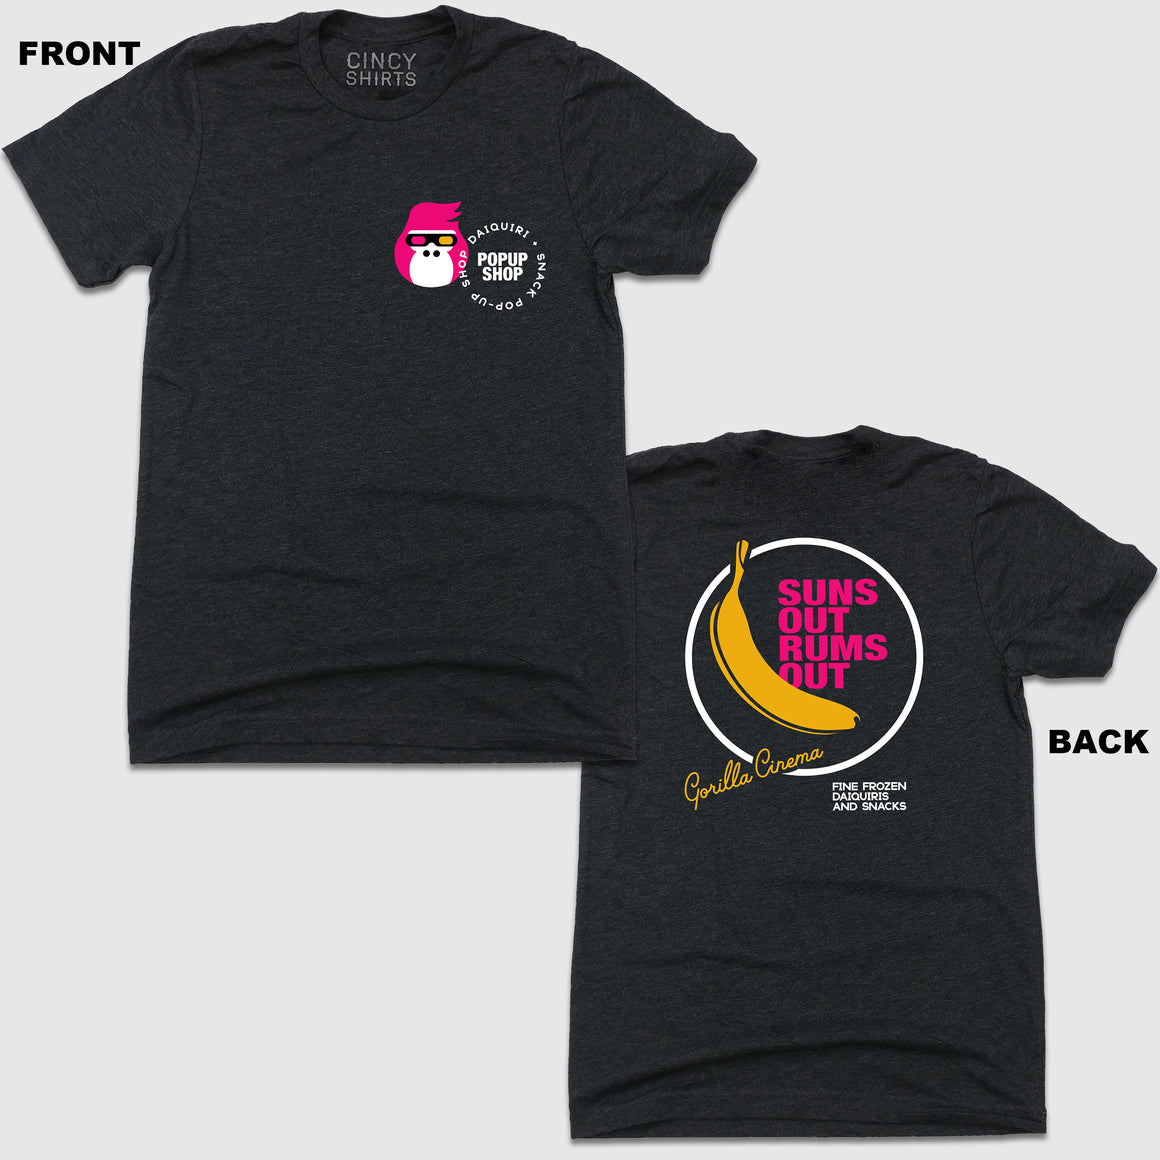 Gorilla Cinema Presents "Suns Out Rums Out" - Black Tee - Cincy Shirts